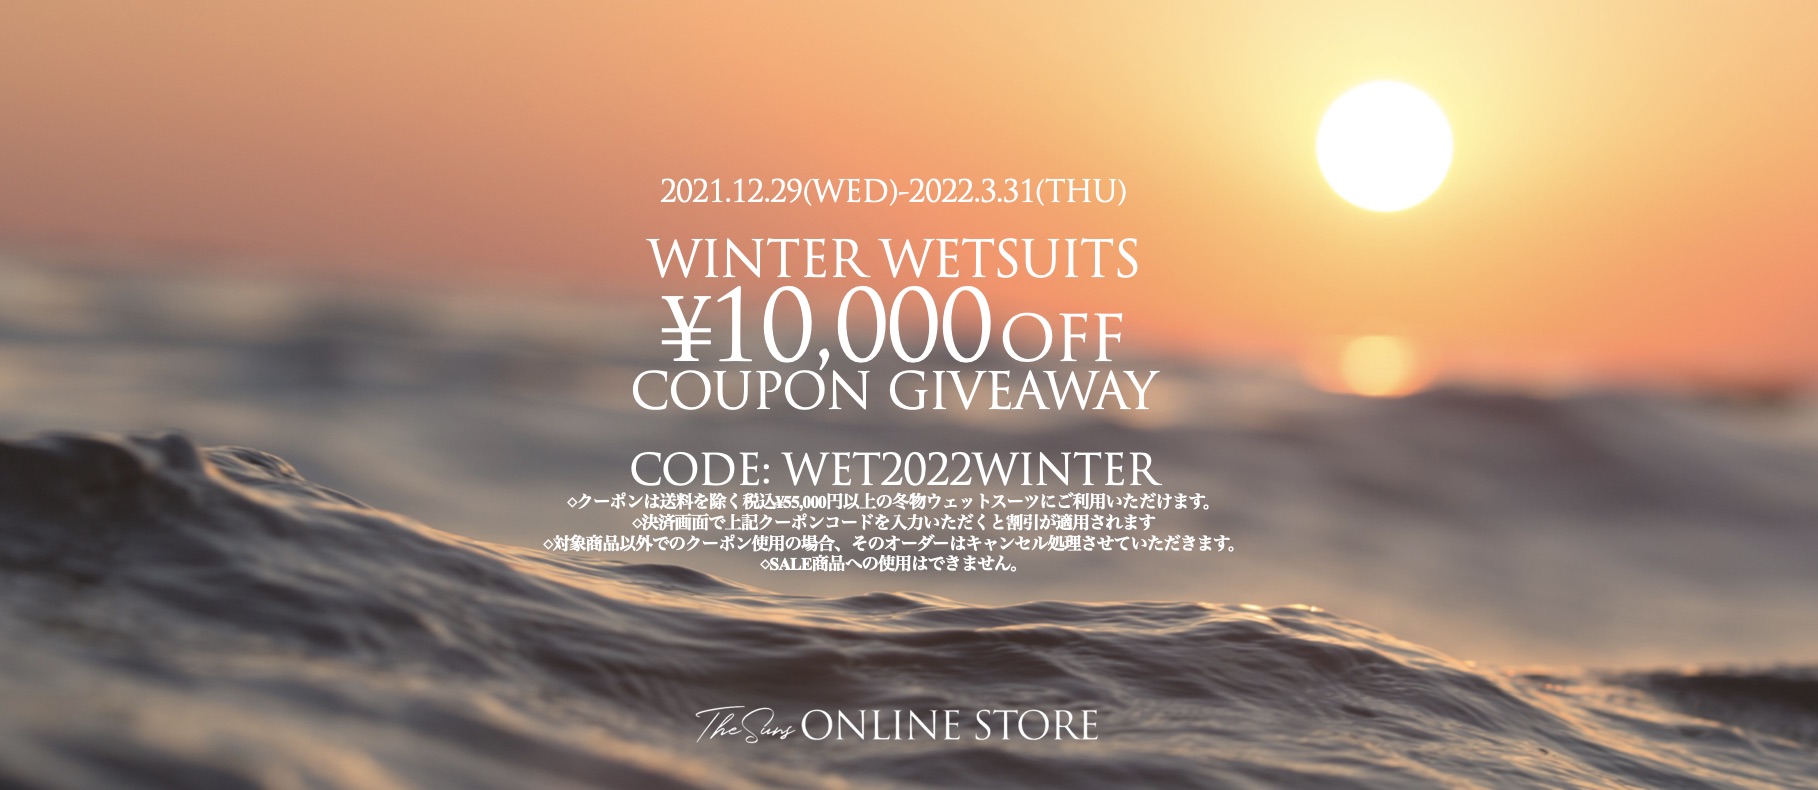 【12/29~3/31】WINTER WETSUITS ¥10,000OFFクーポン配布！